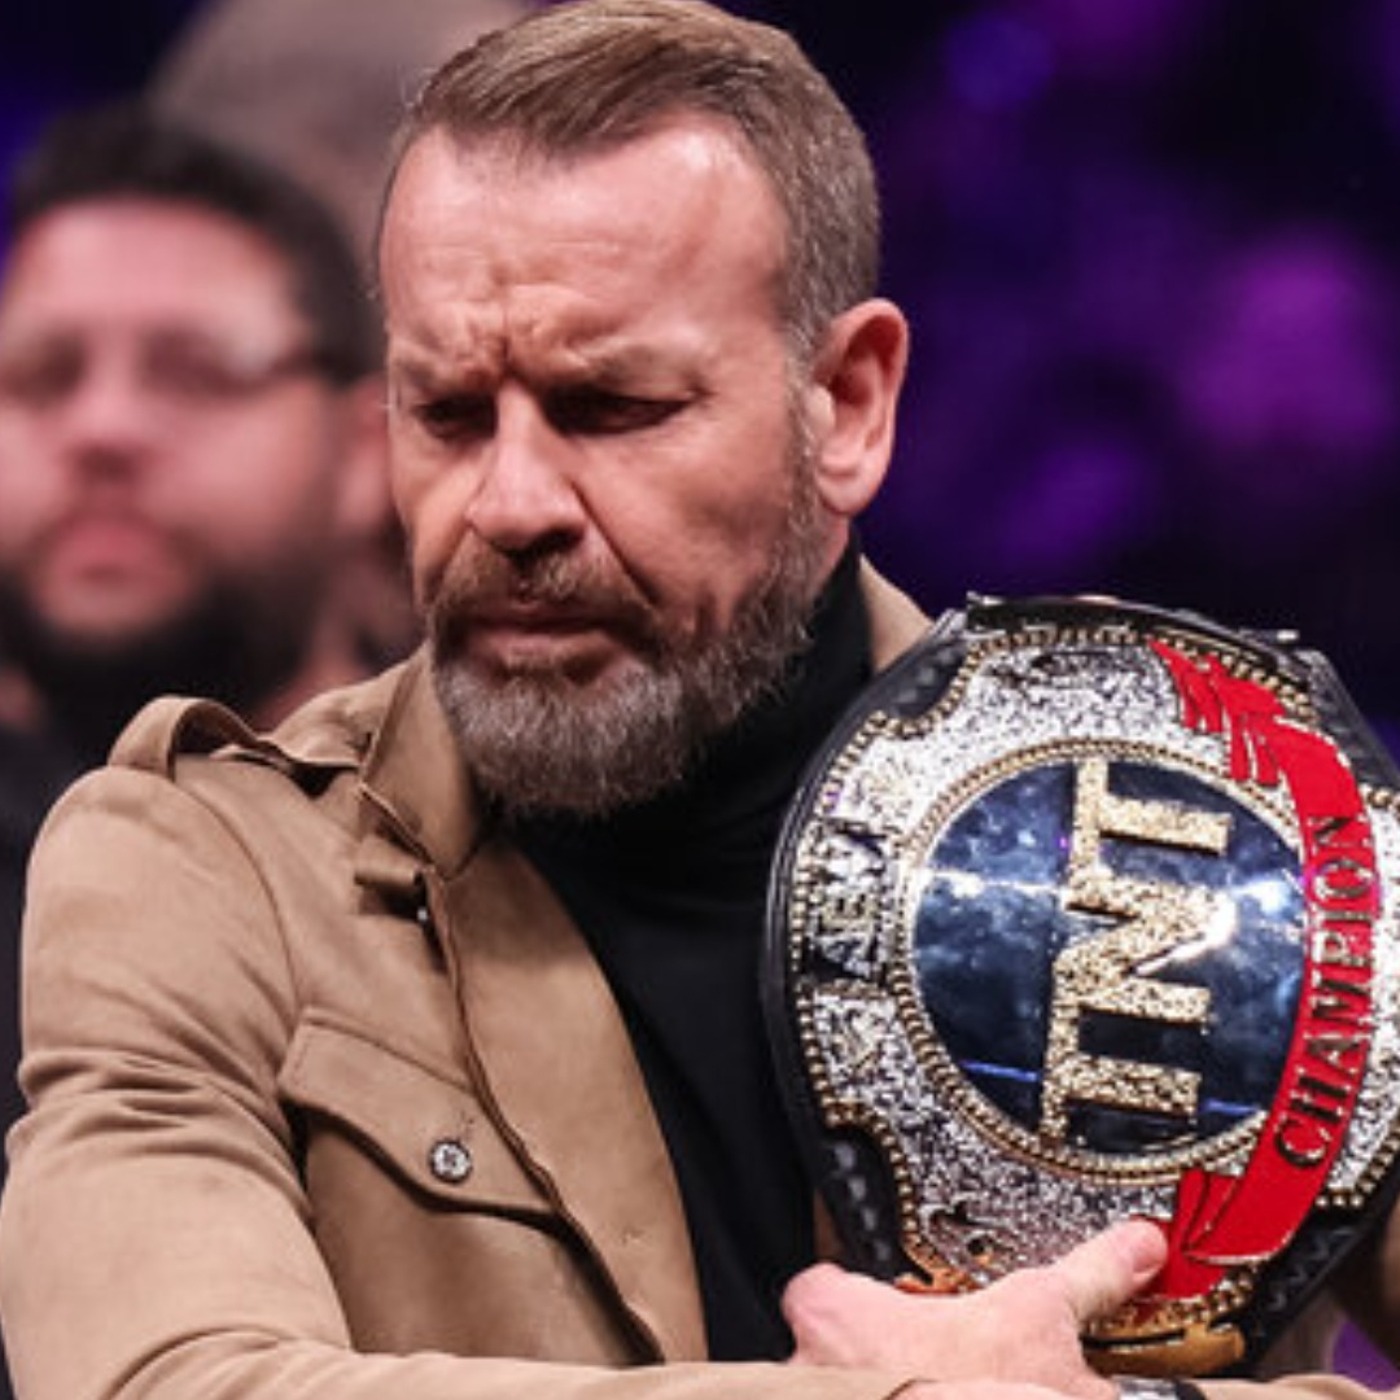 WINC Podcast (11/29): AEW Dynamite Review, Triple H, More